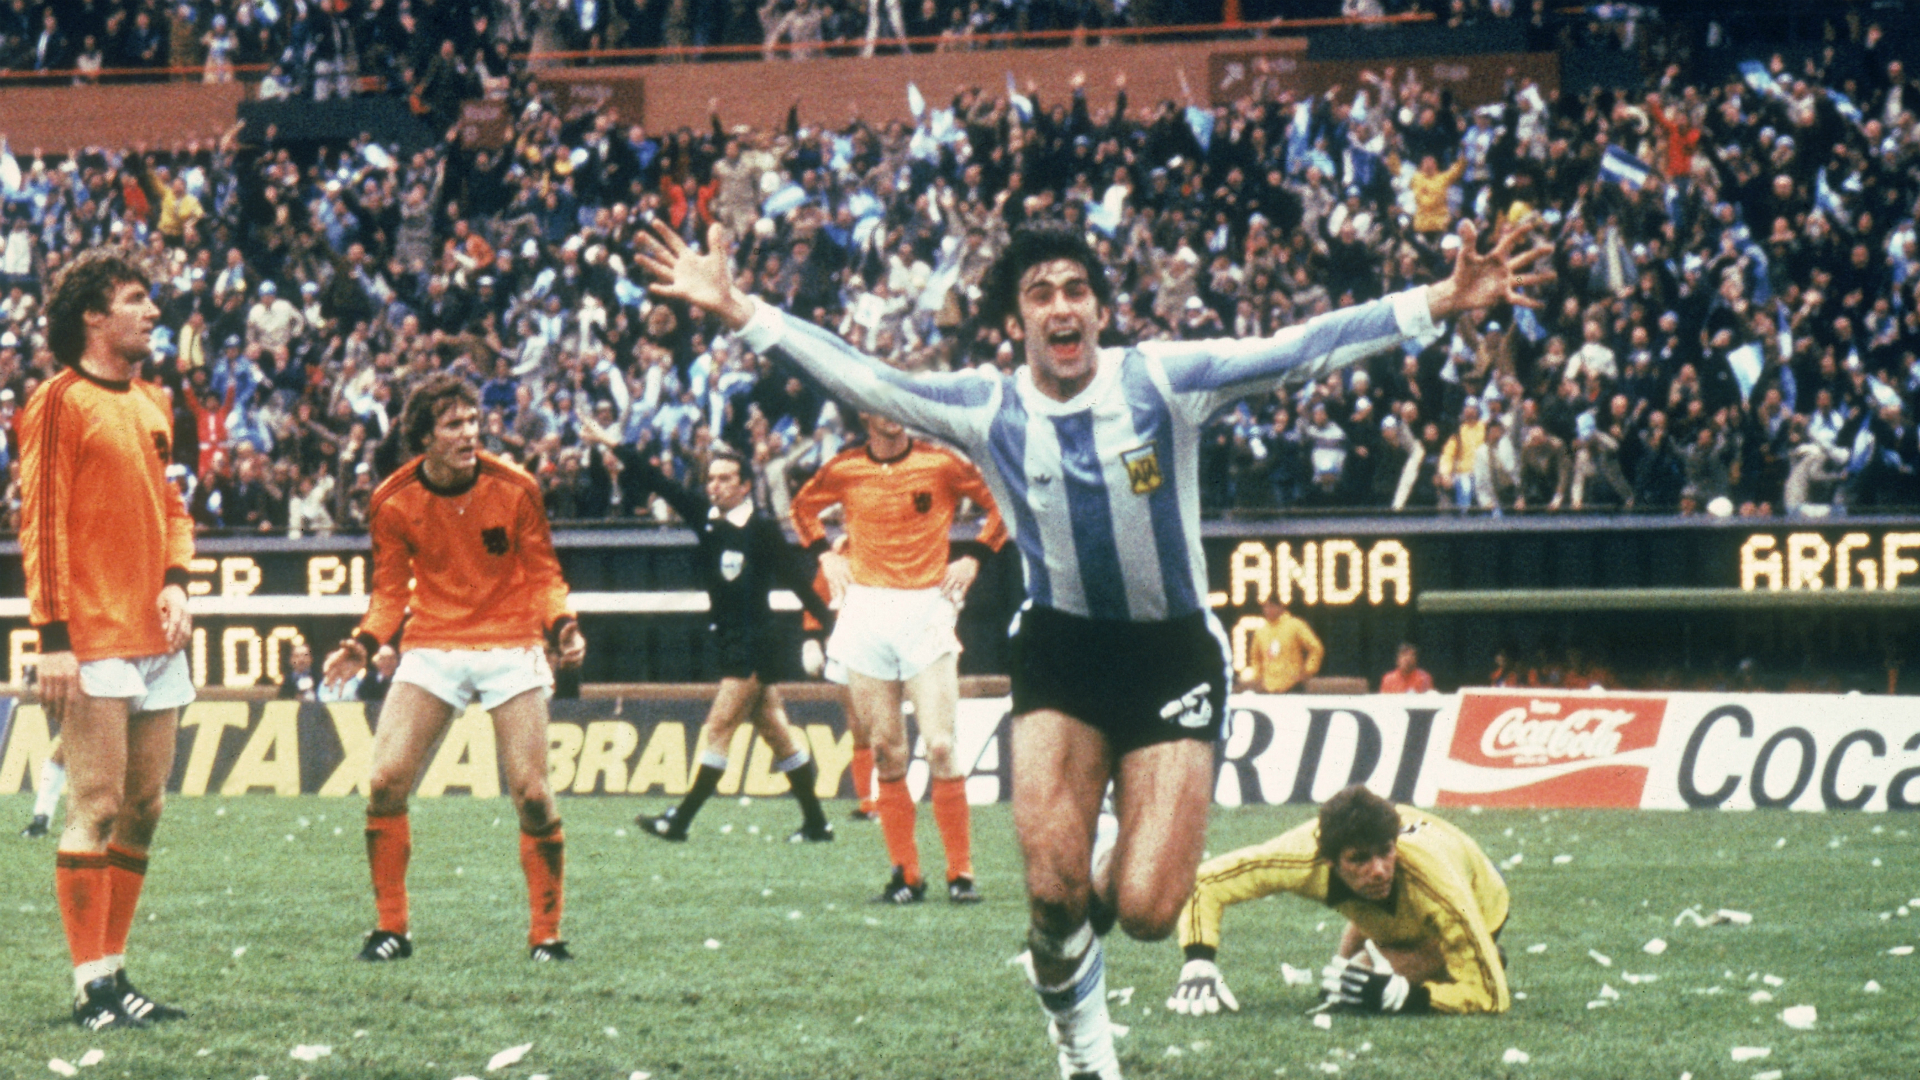 The dark story of the dictatorship behind Argentina's 1978 World Cup